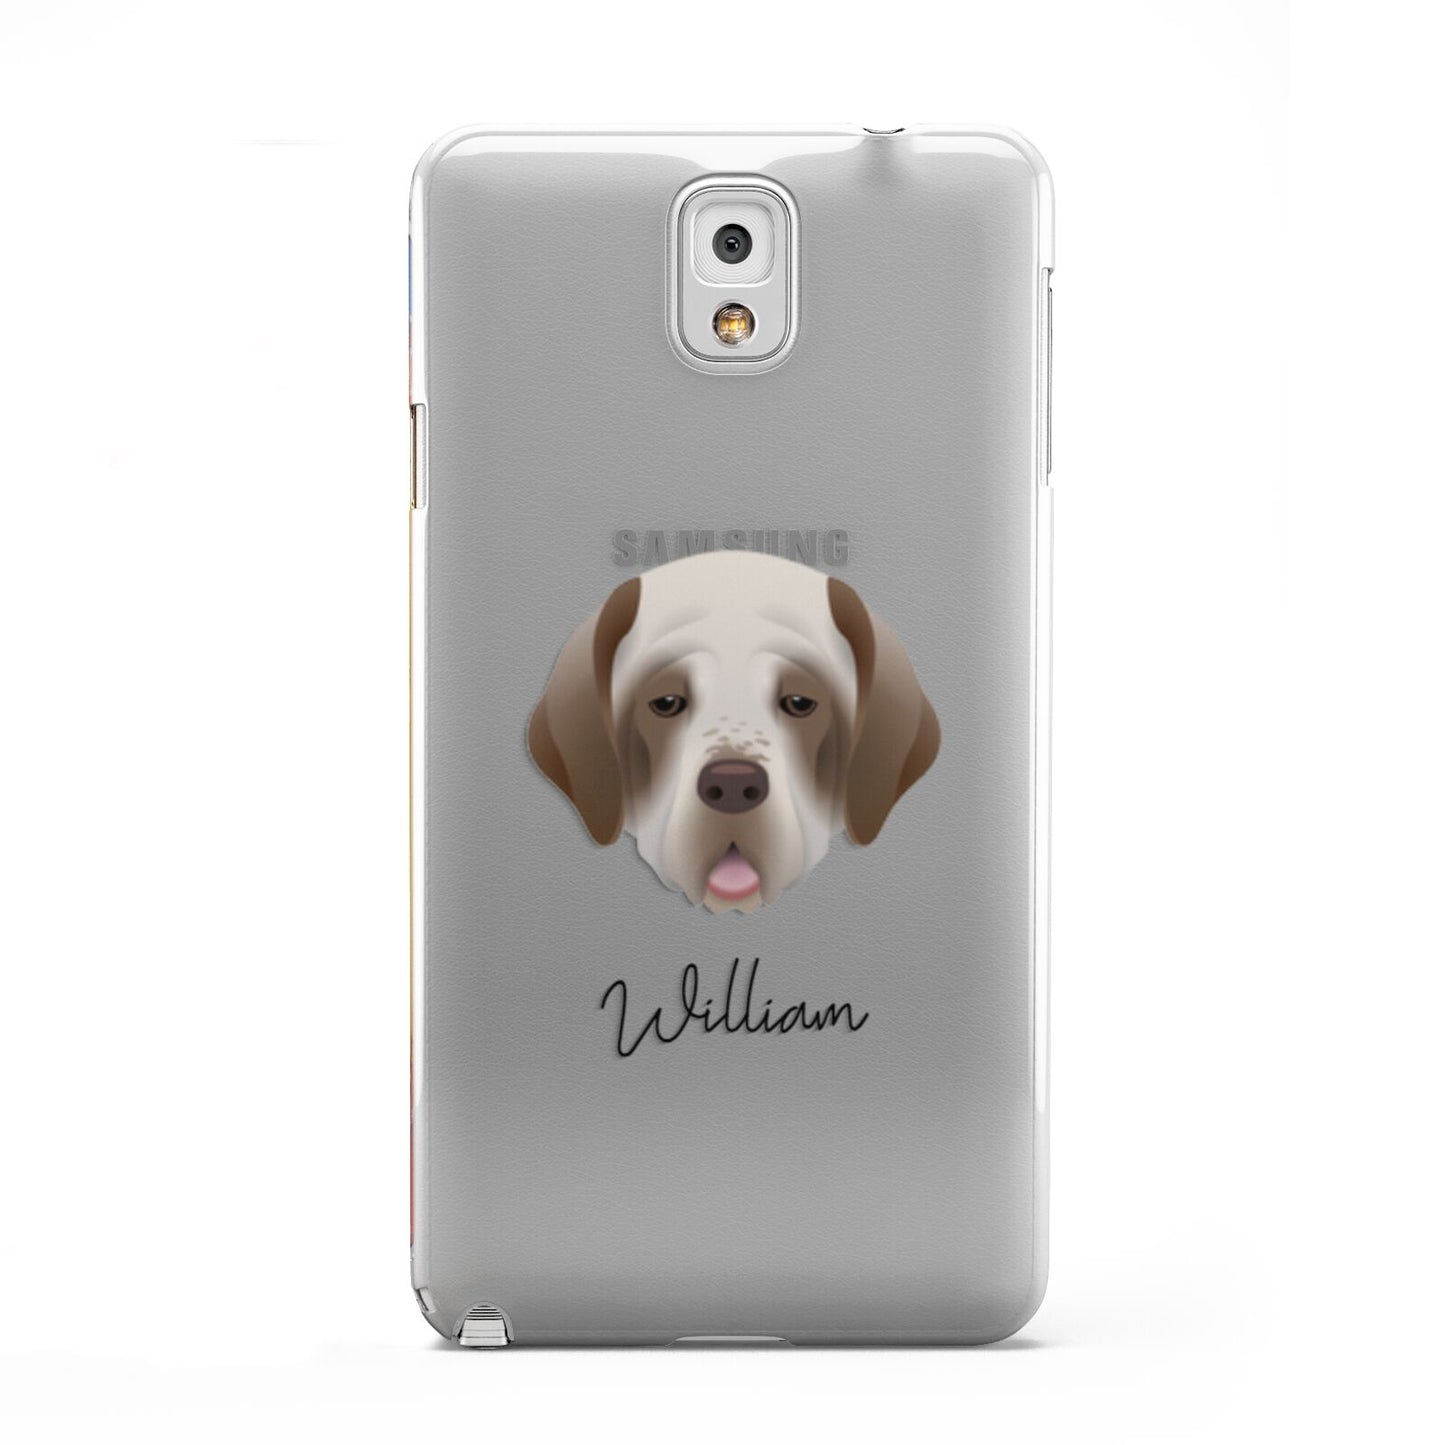 Clumber Spaniel Personalised Samsung Galaxy Note 3 Case